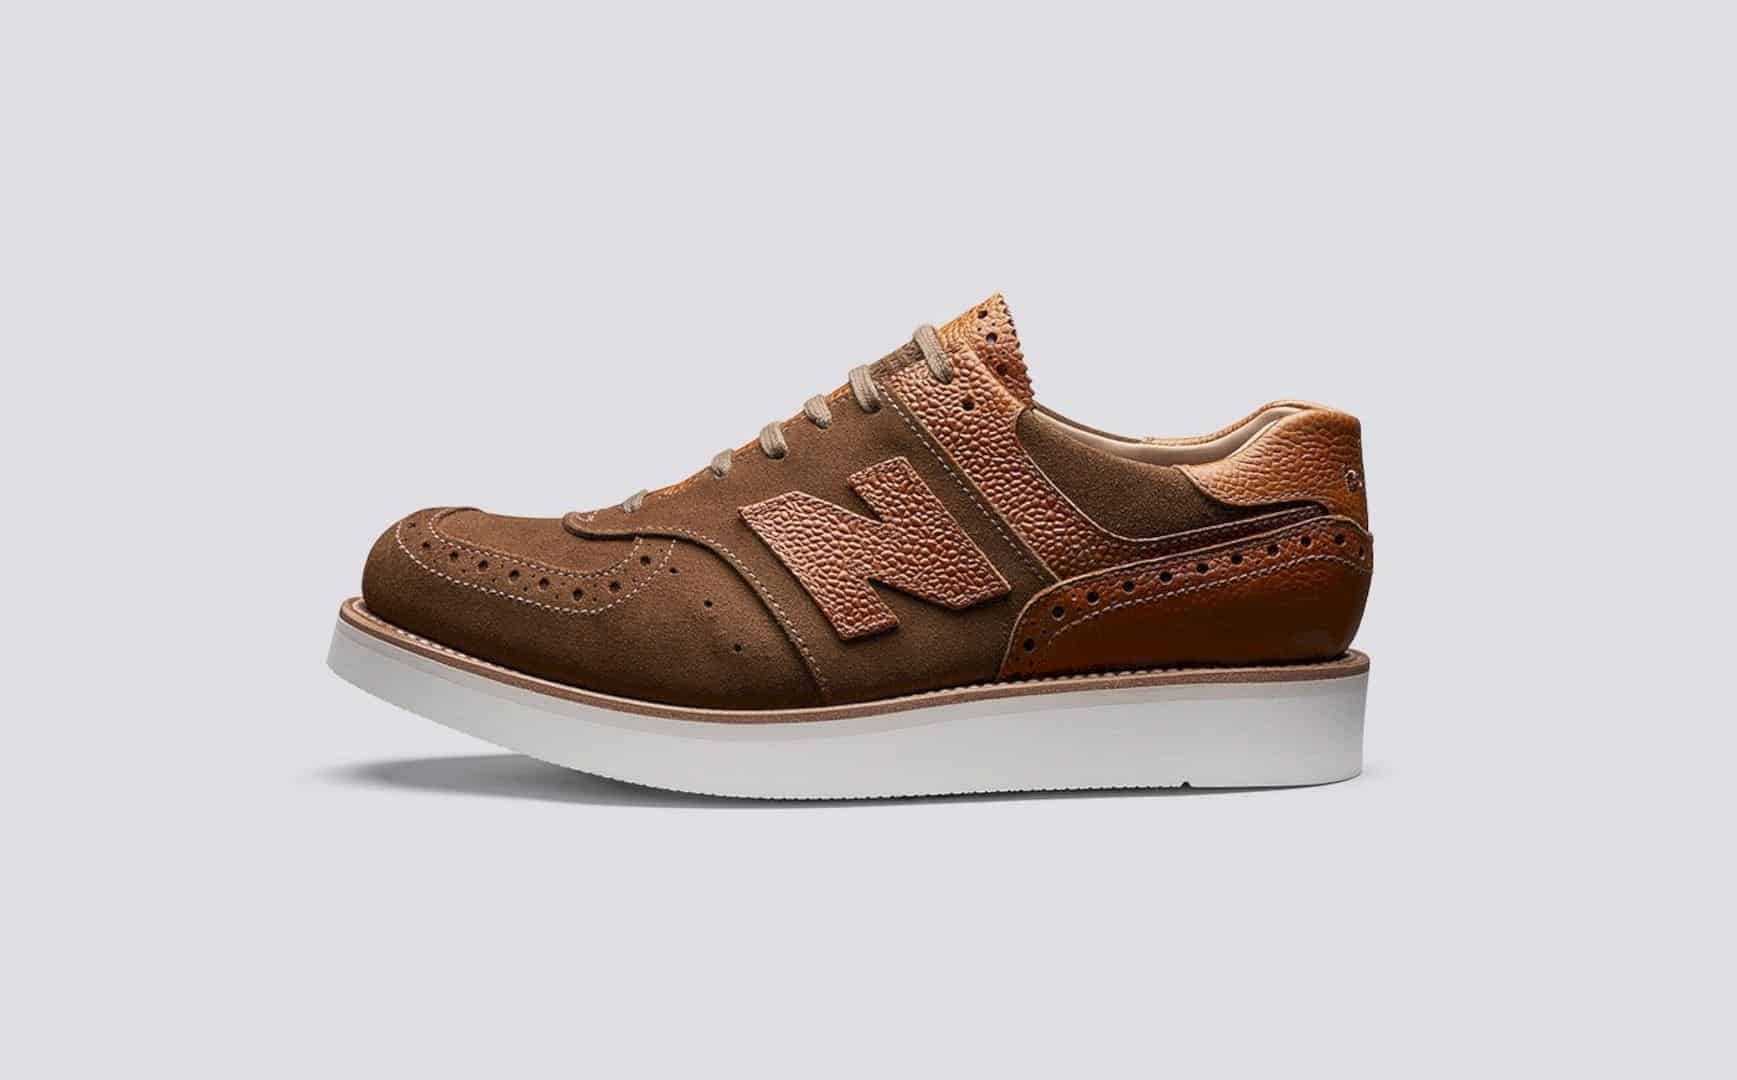 grenson x new balance 576 welted